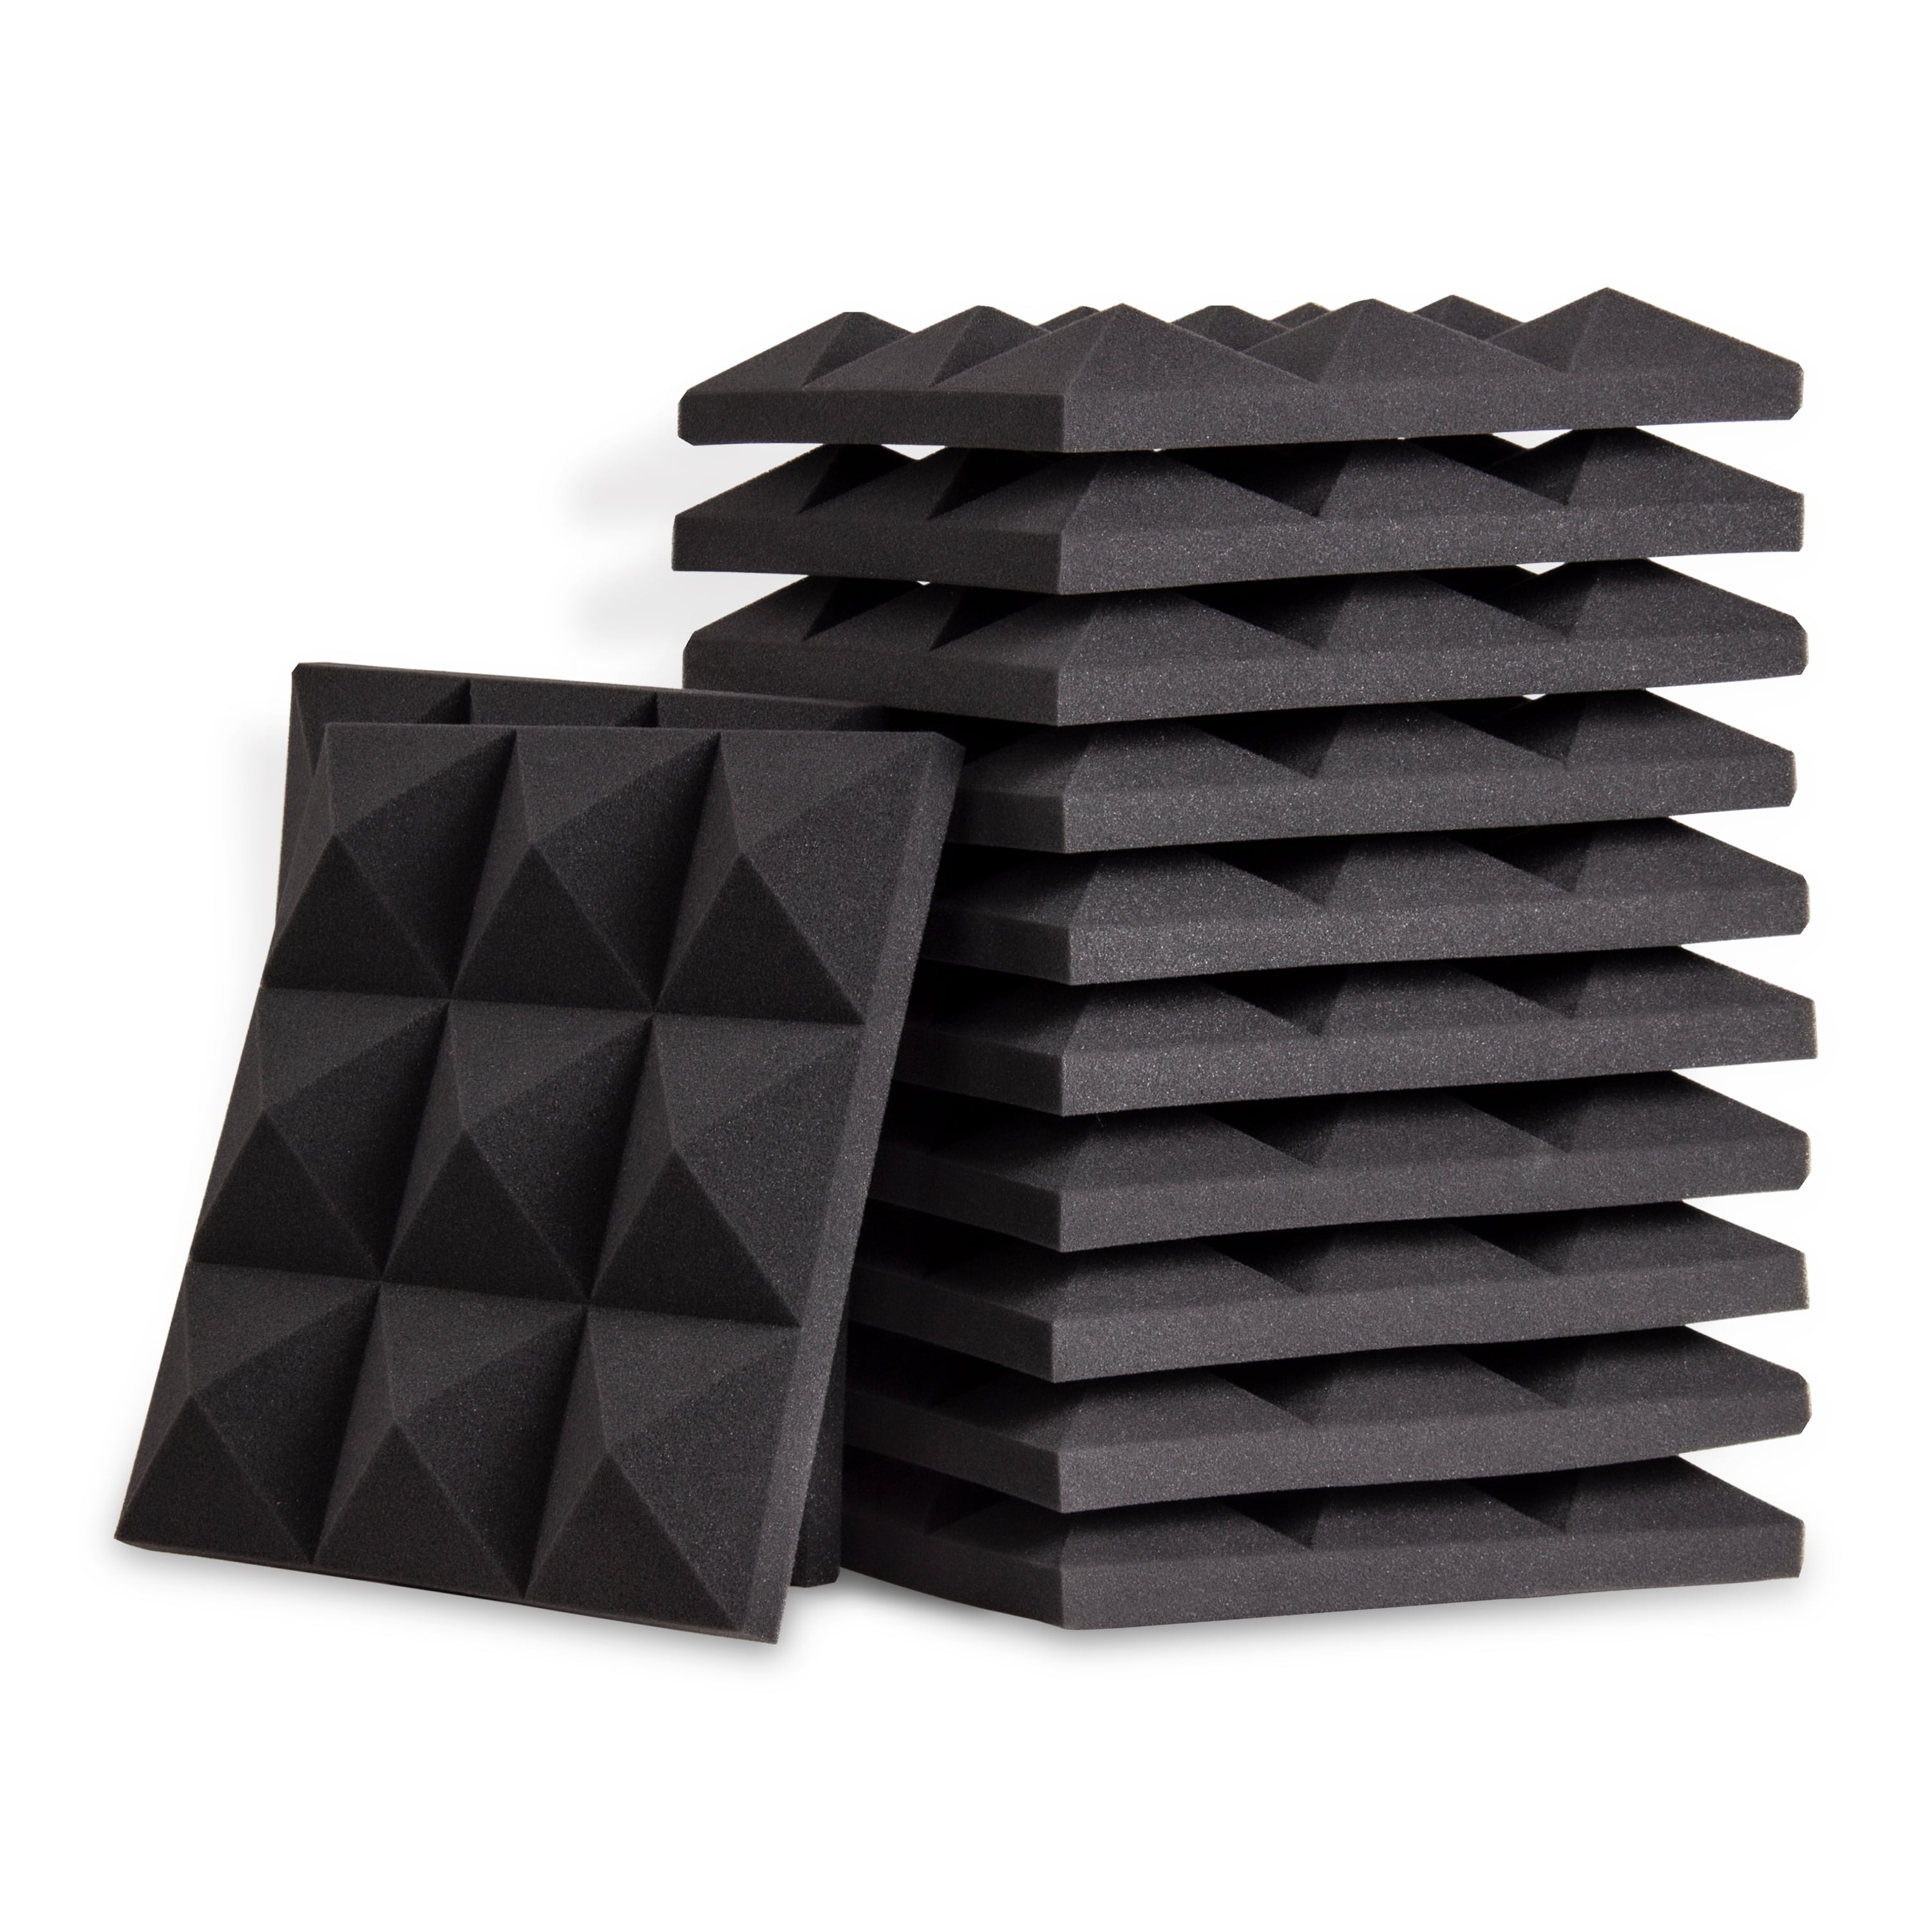 Focusound Acoustic Foam 1 x 12 x 12 Noise Cancelling Wedge Panels, 50 Pack.